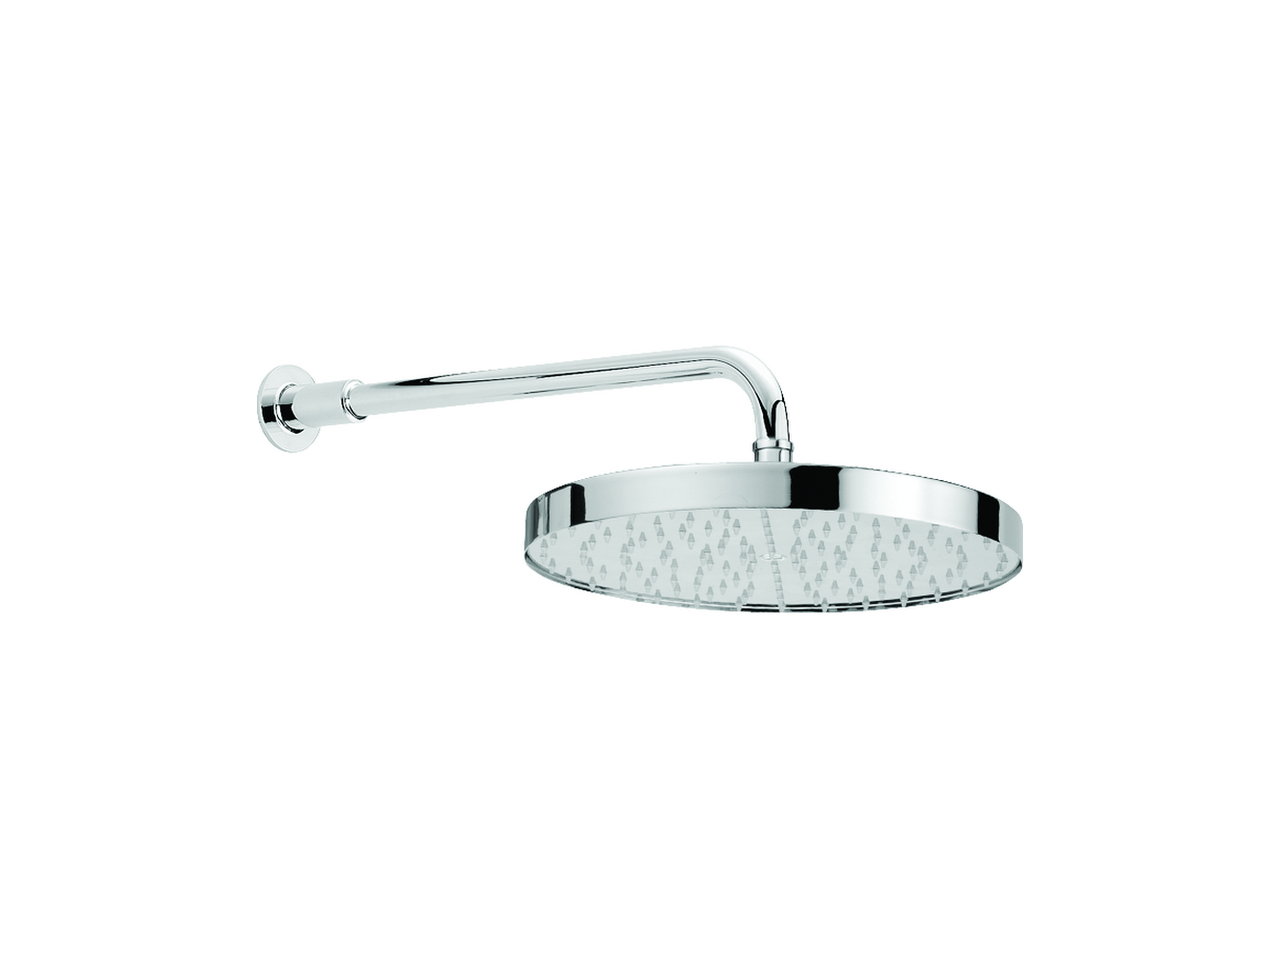 Shower arm with Suite showerhead SHOWER - v1